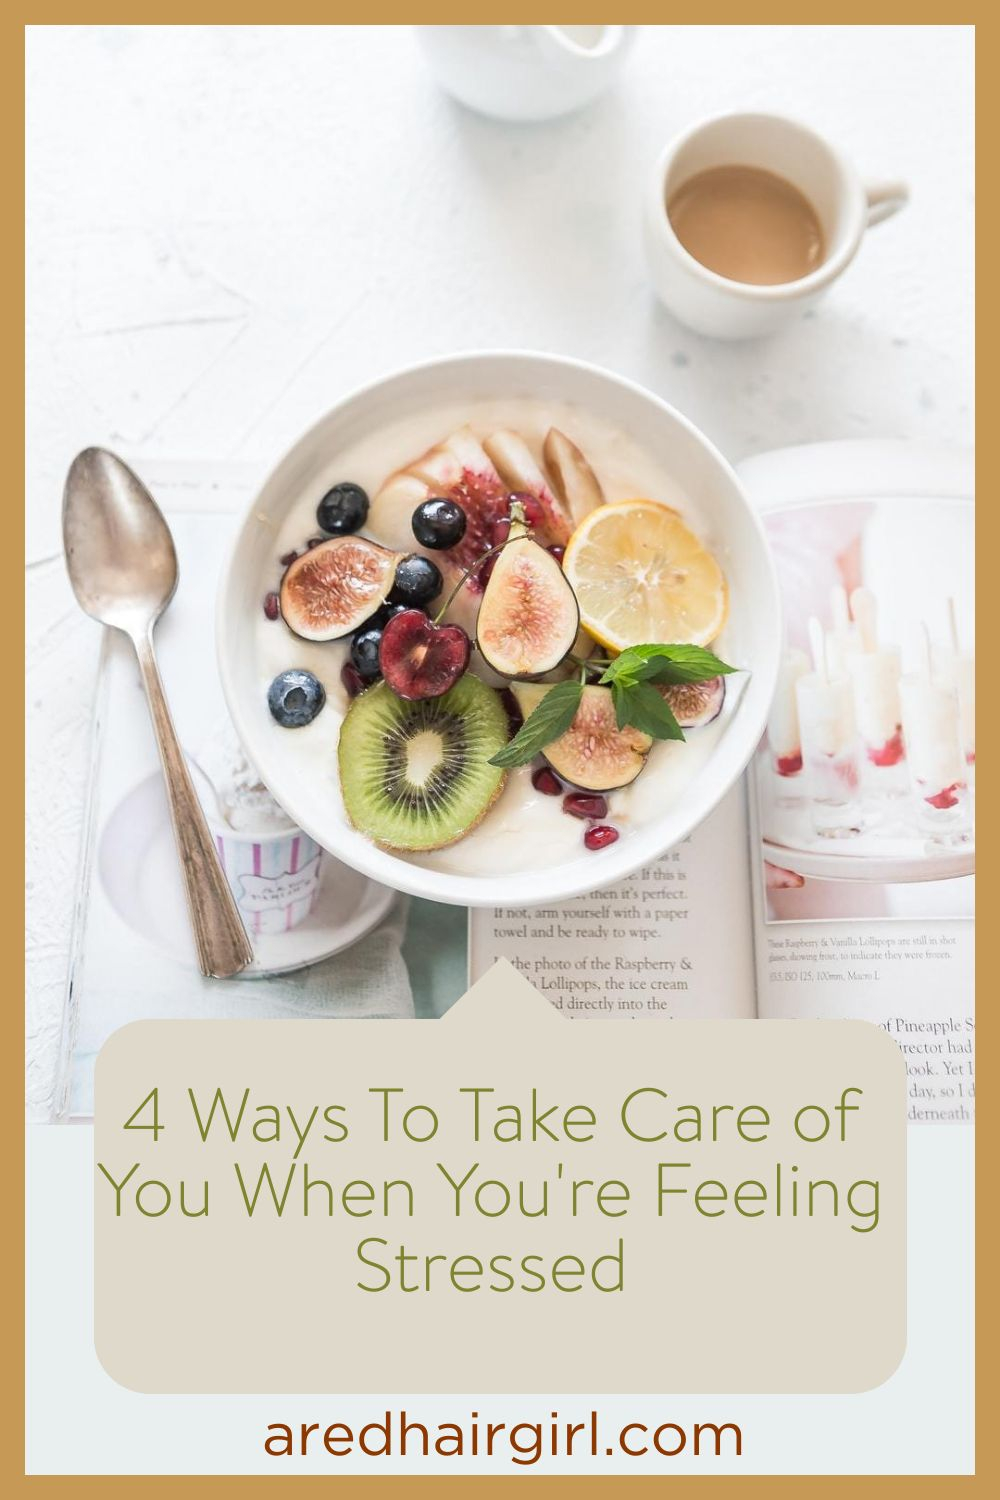 4 Ways To Take Care of You When You're Feeling Stressed